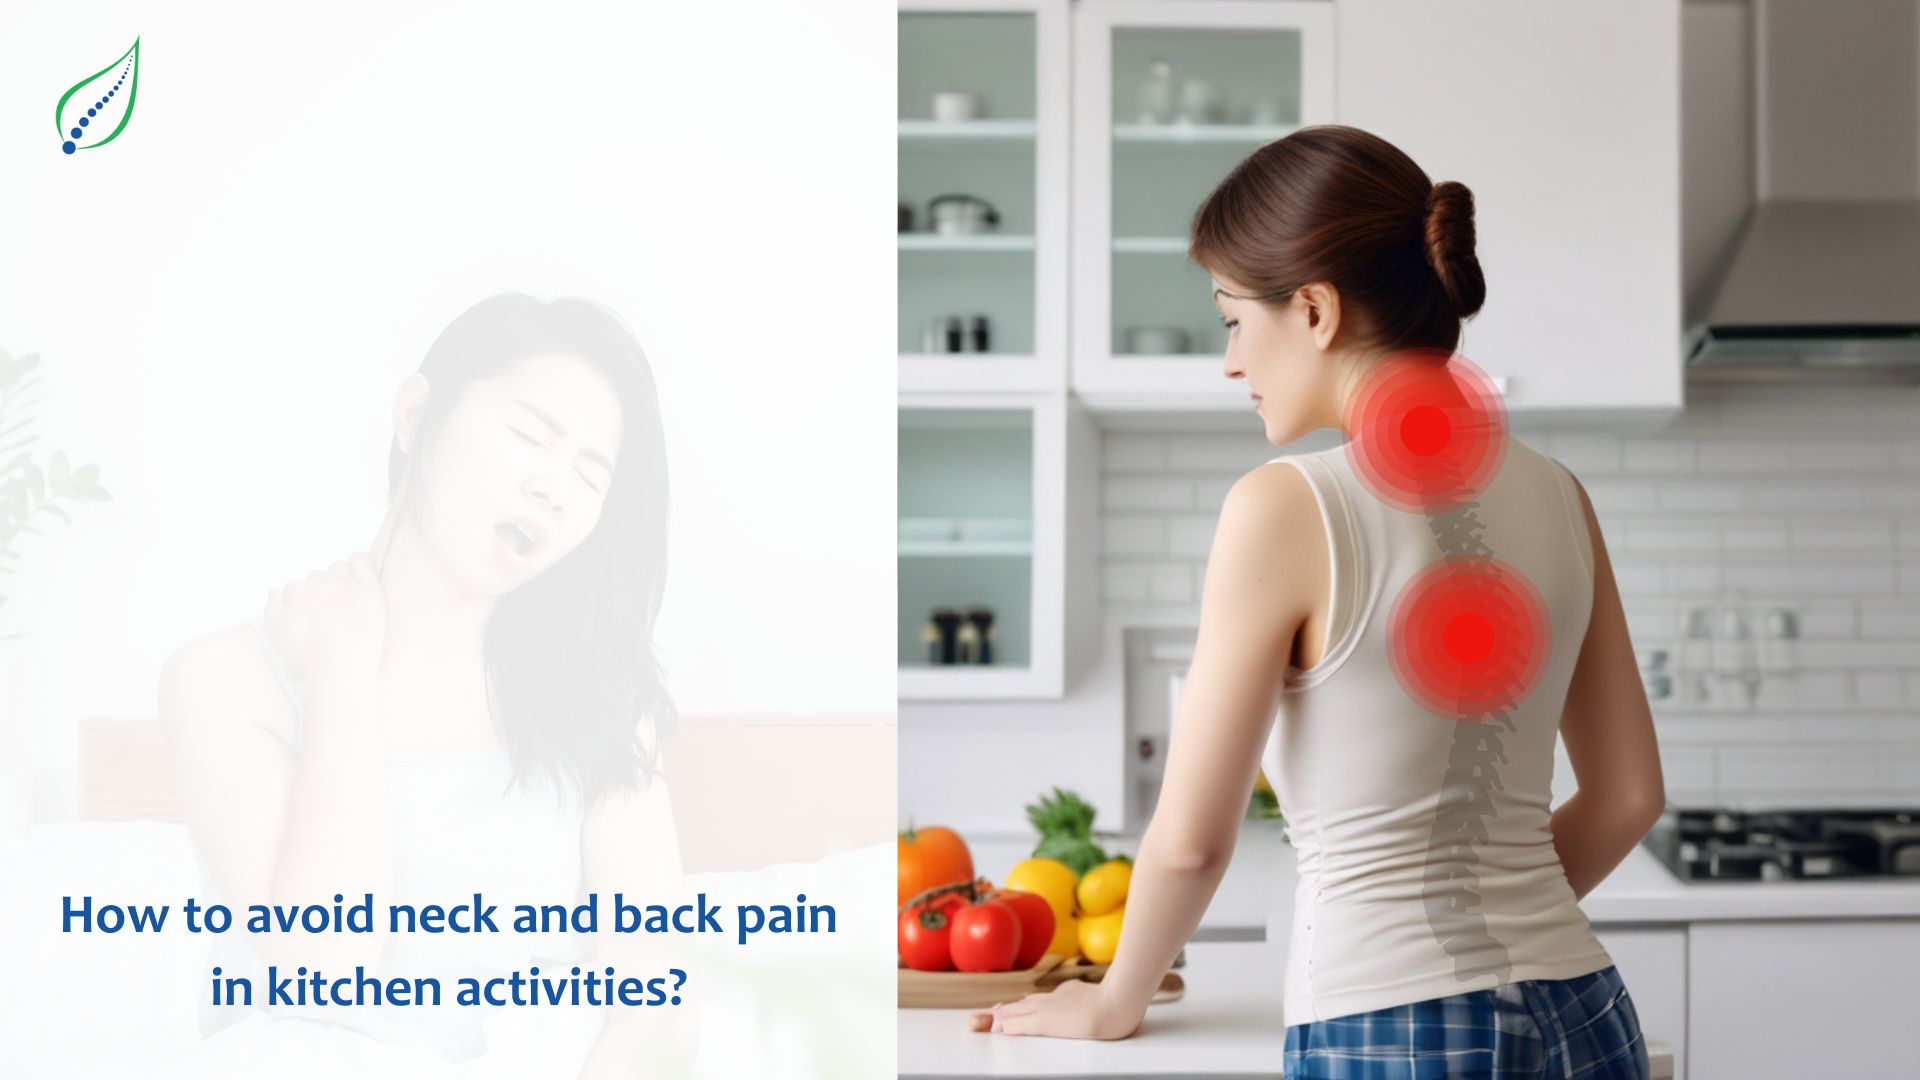 How to Avoid Neck and Back Pain in Kitchen Activities?